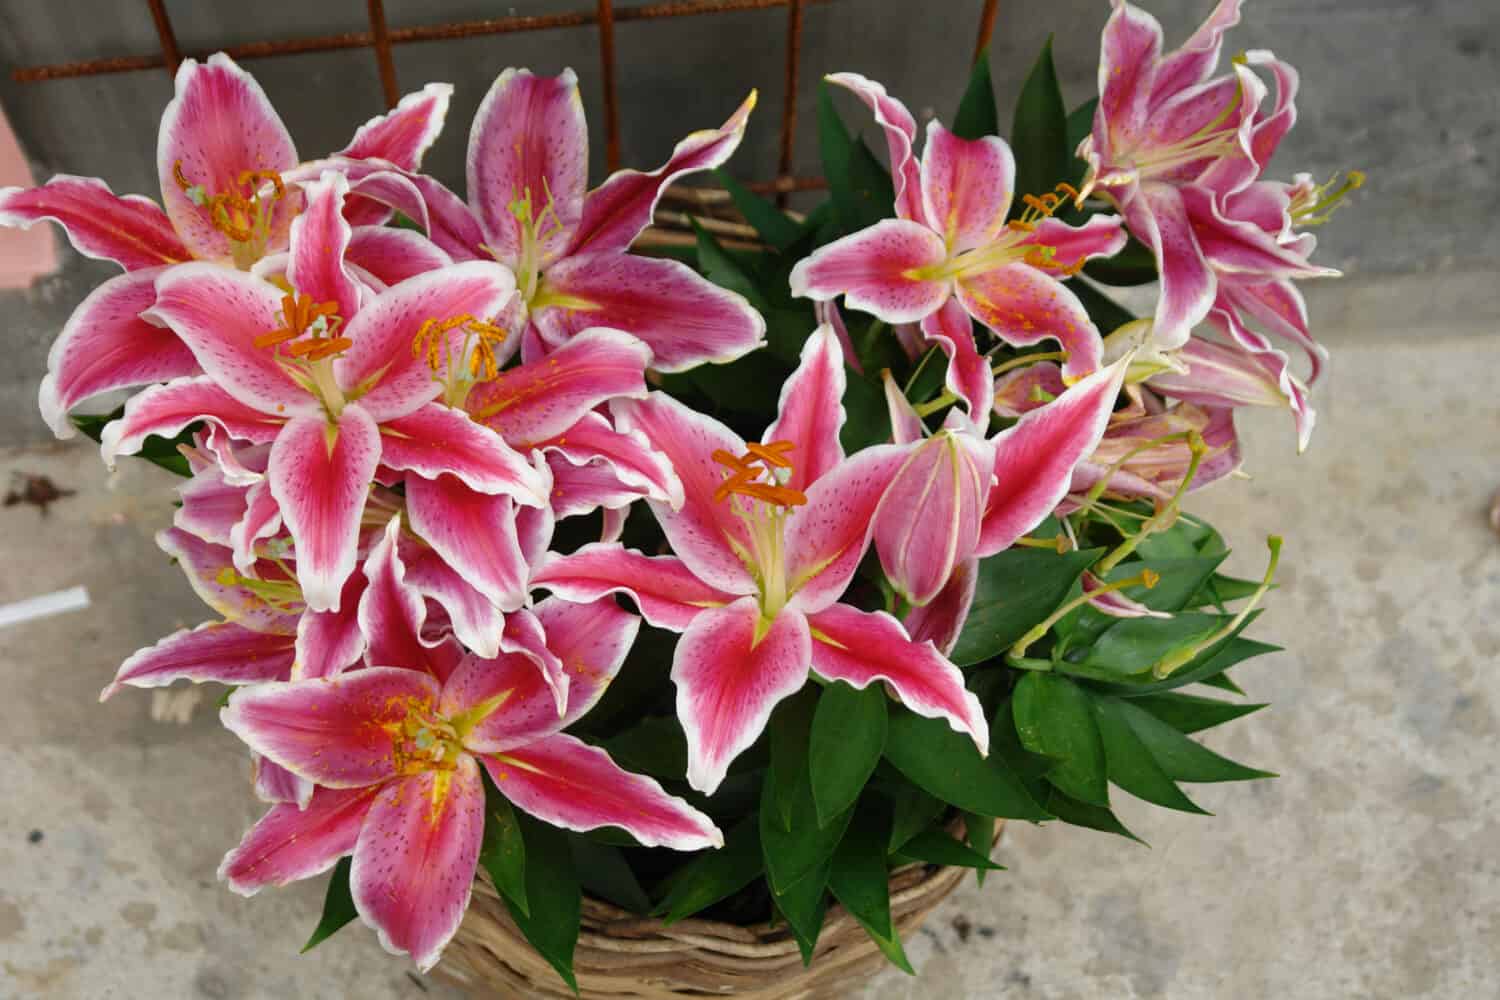 Beautiful bright  Lilium orientalis 'Stargazer' with vibrant pink petals with white edges in a wicker pot